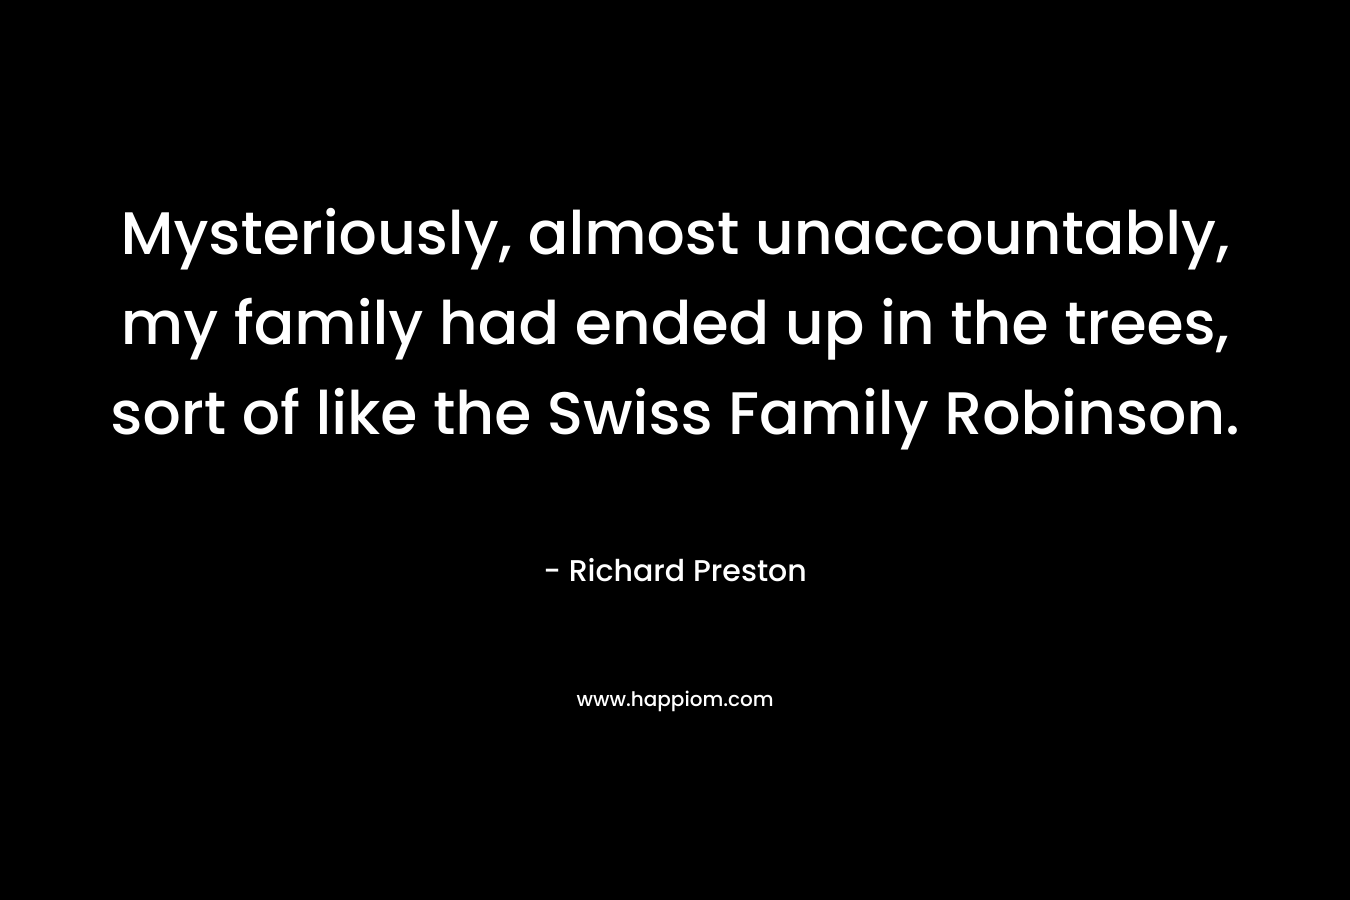 Mysteriously, almost unaccountably, my family had ended up in the trees, sort of like the Swiss Family Robinson. – Richard   Preston